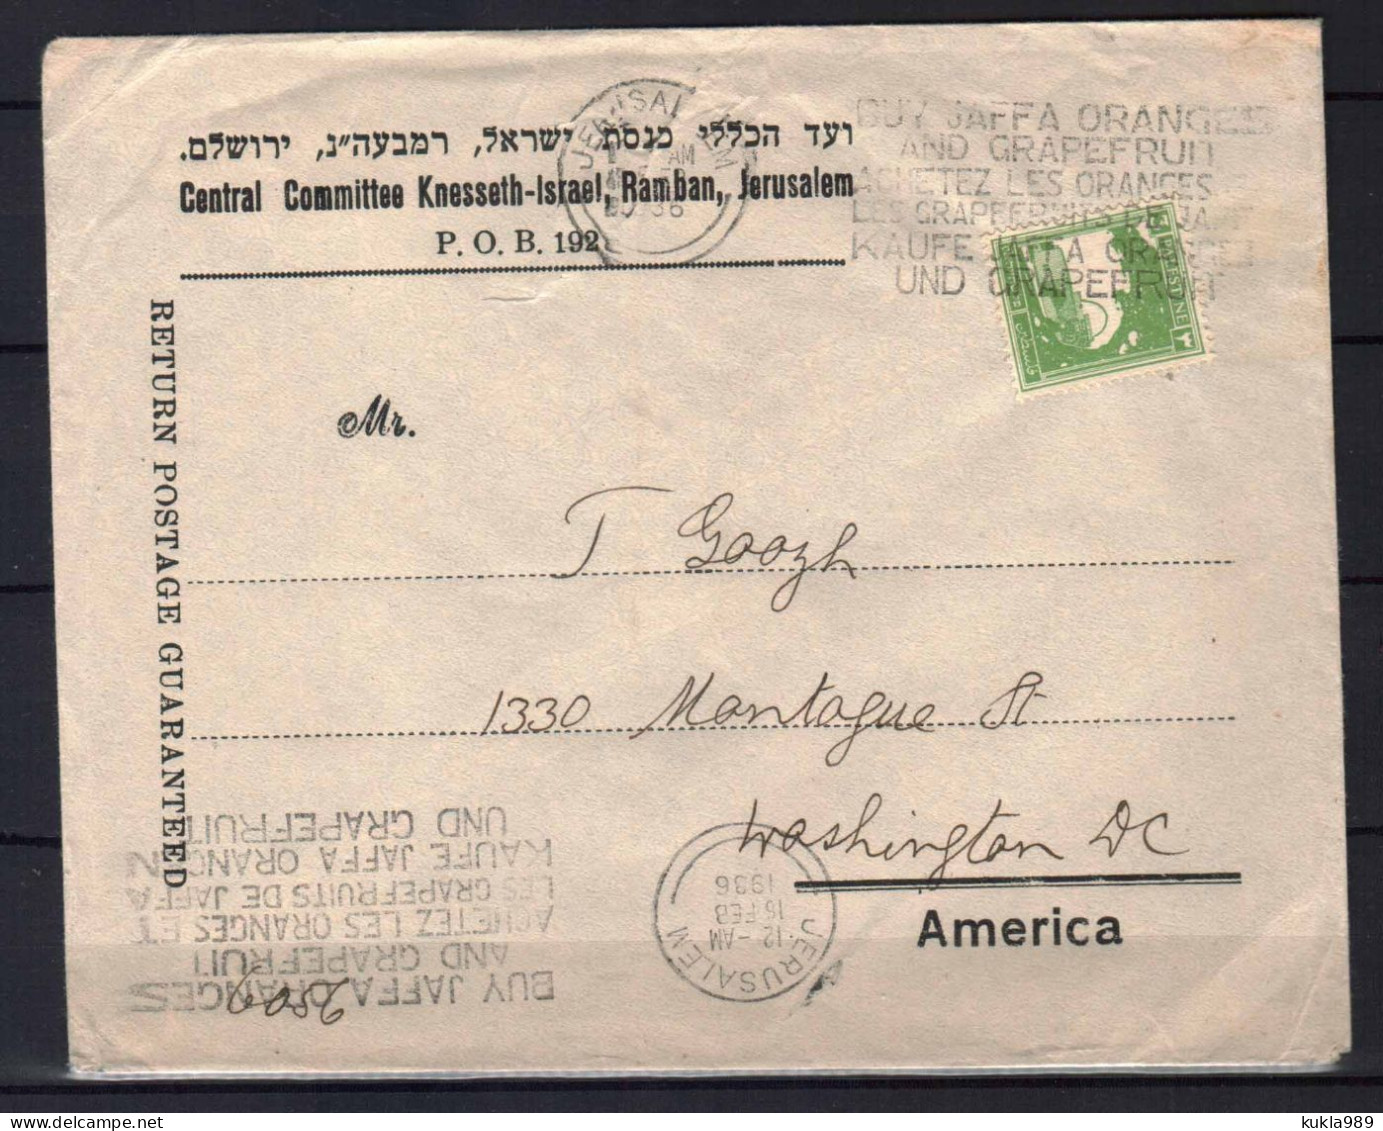 JUDAICA PALESTINE STAMPS  ISRAEL KNESSETH OFFICIAL COVER TO USA - Levant Britannique